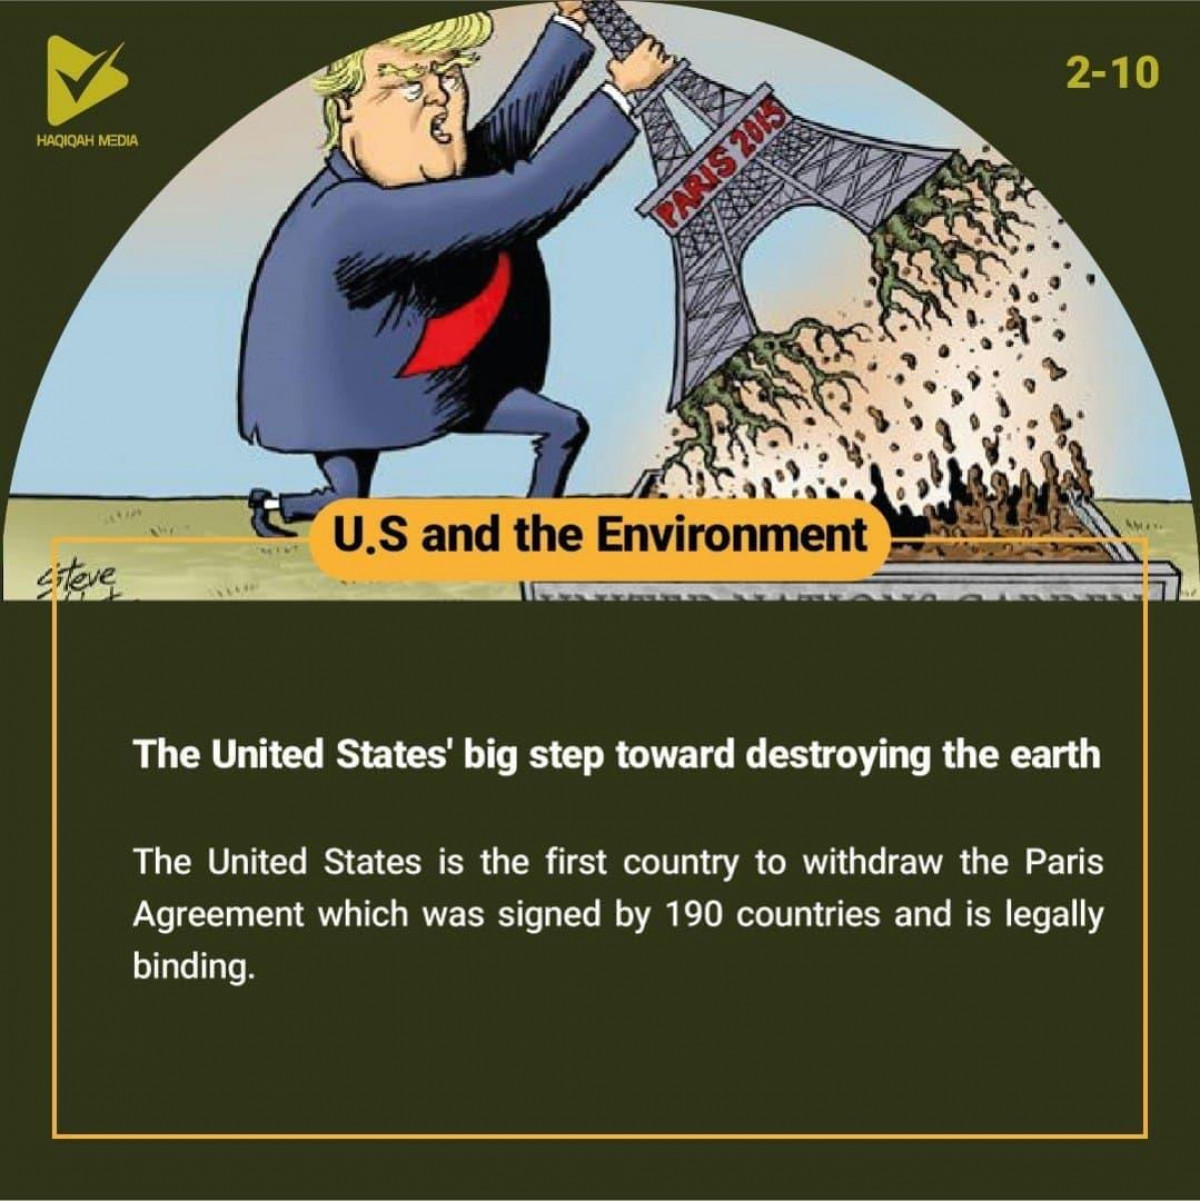 U.S and the Environment